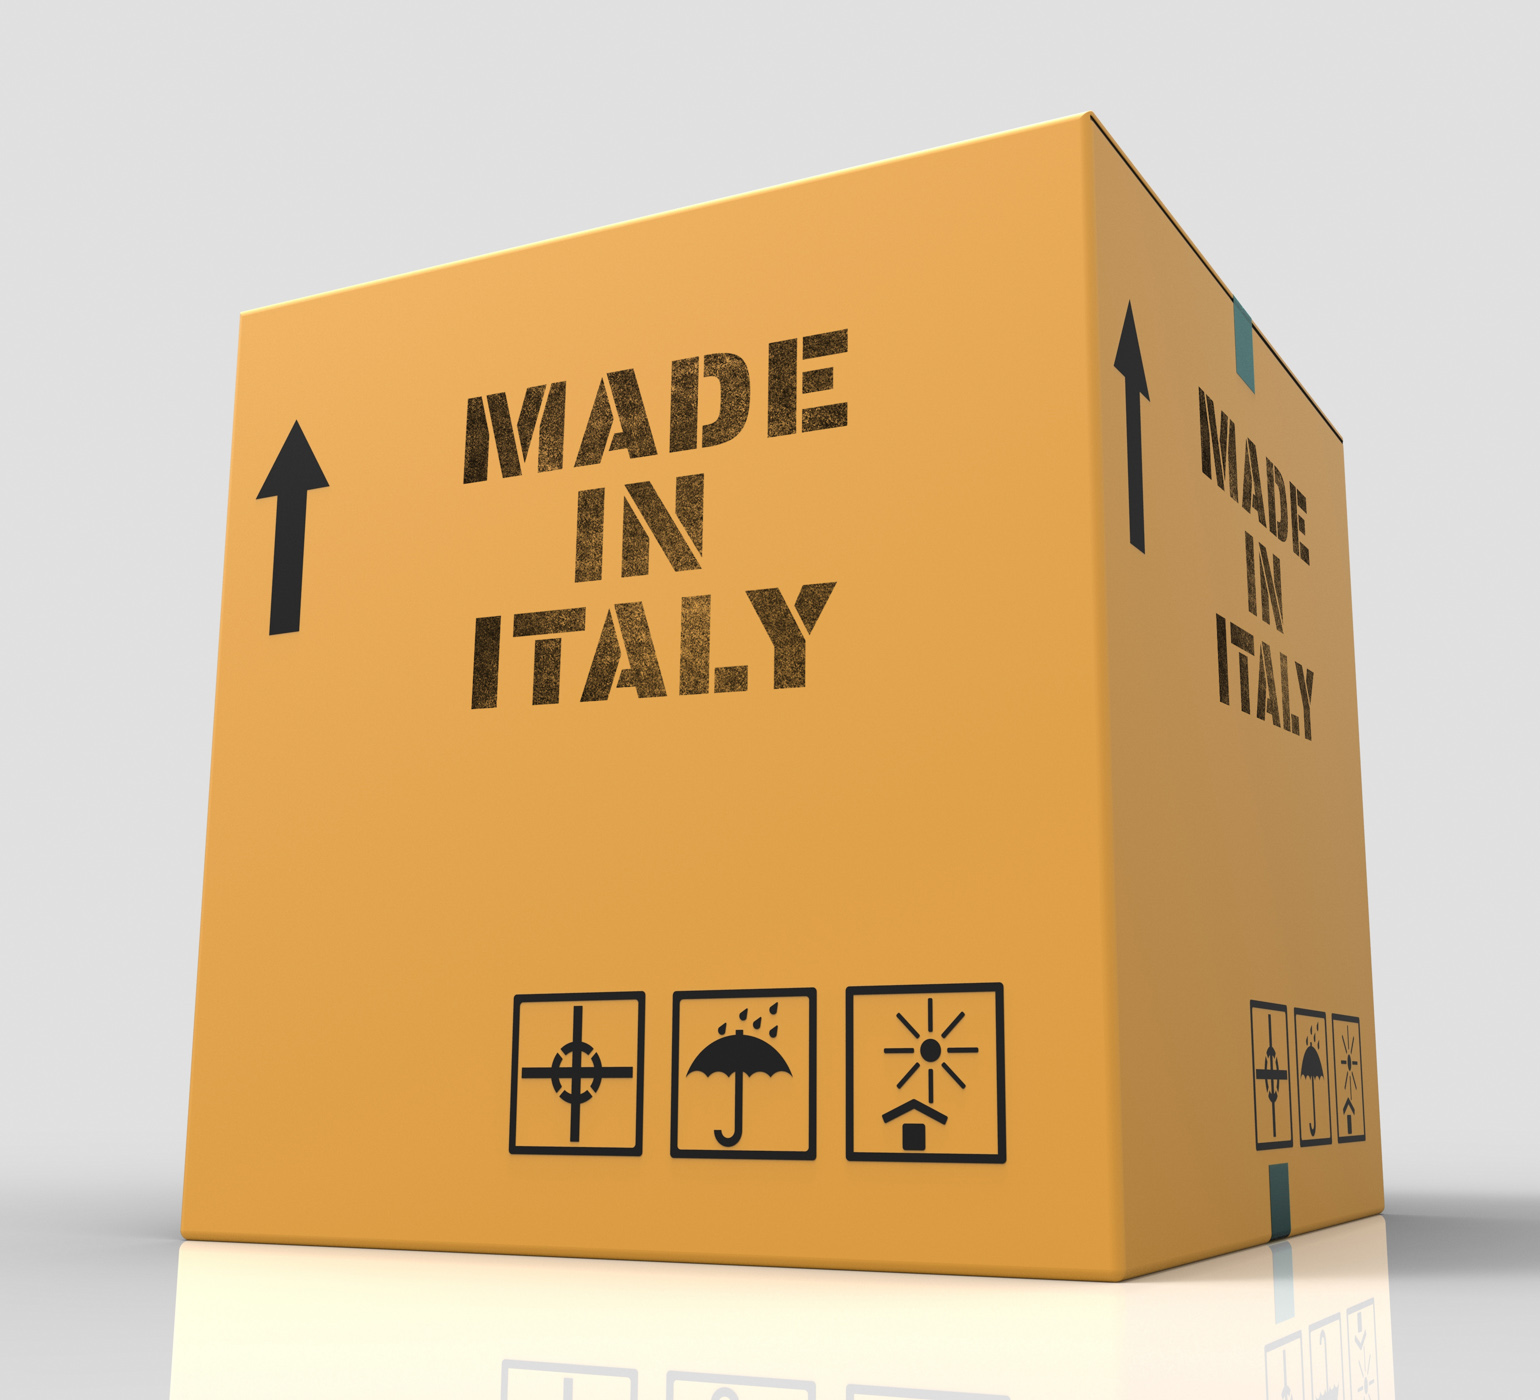 Made in italy represents product export and purchase 3d rendering photo